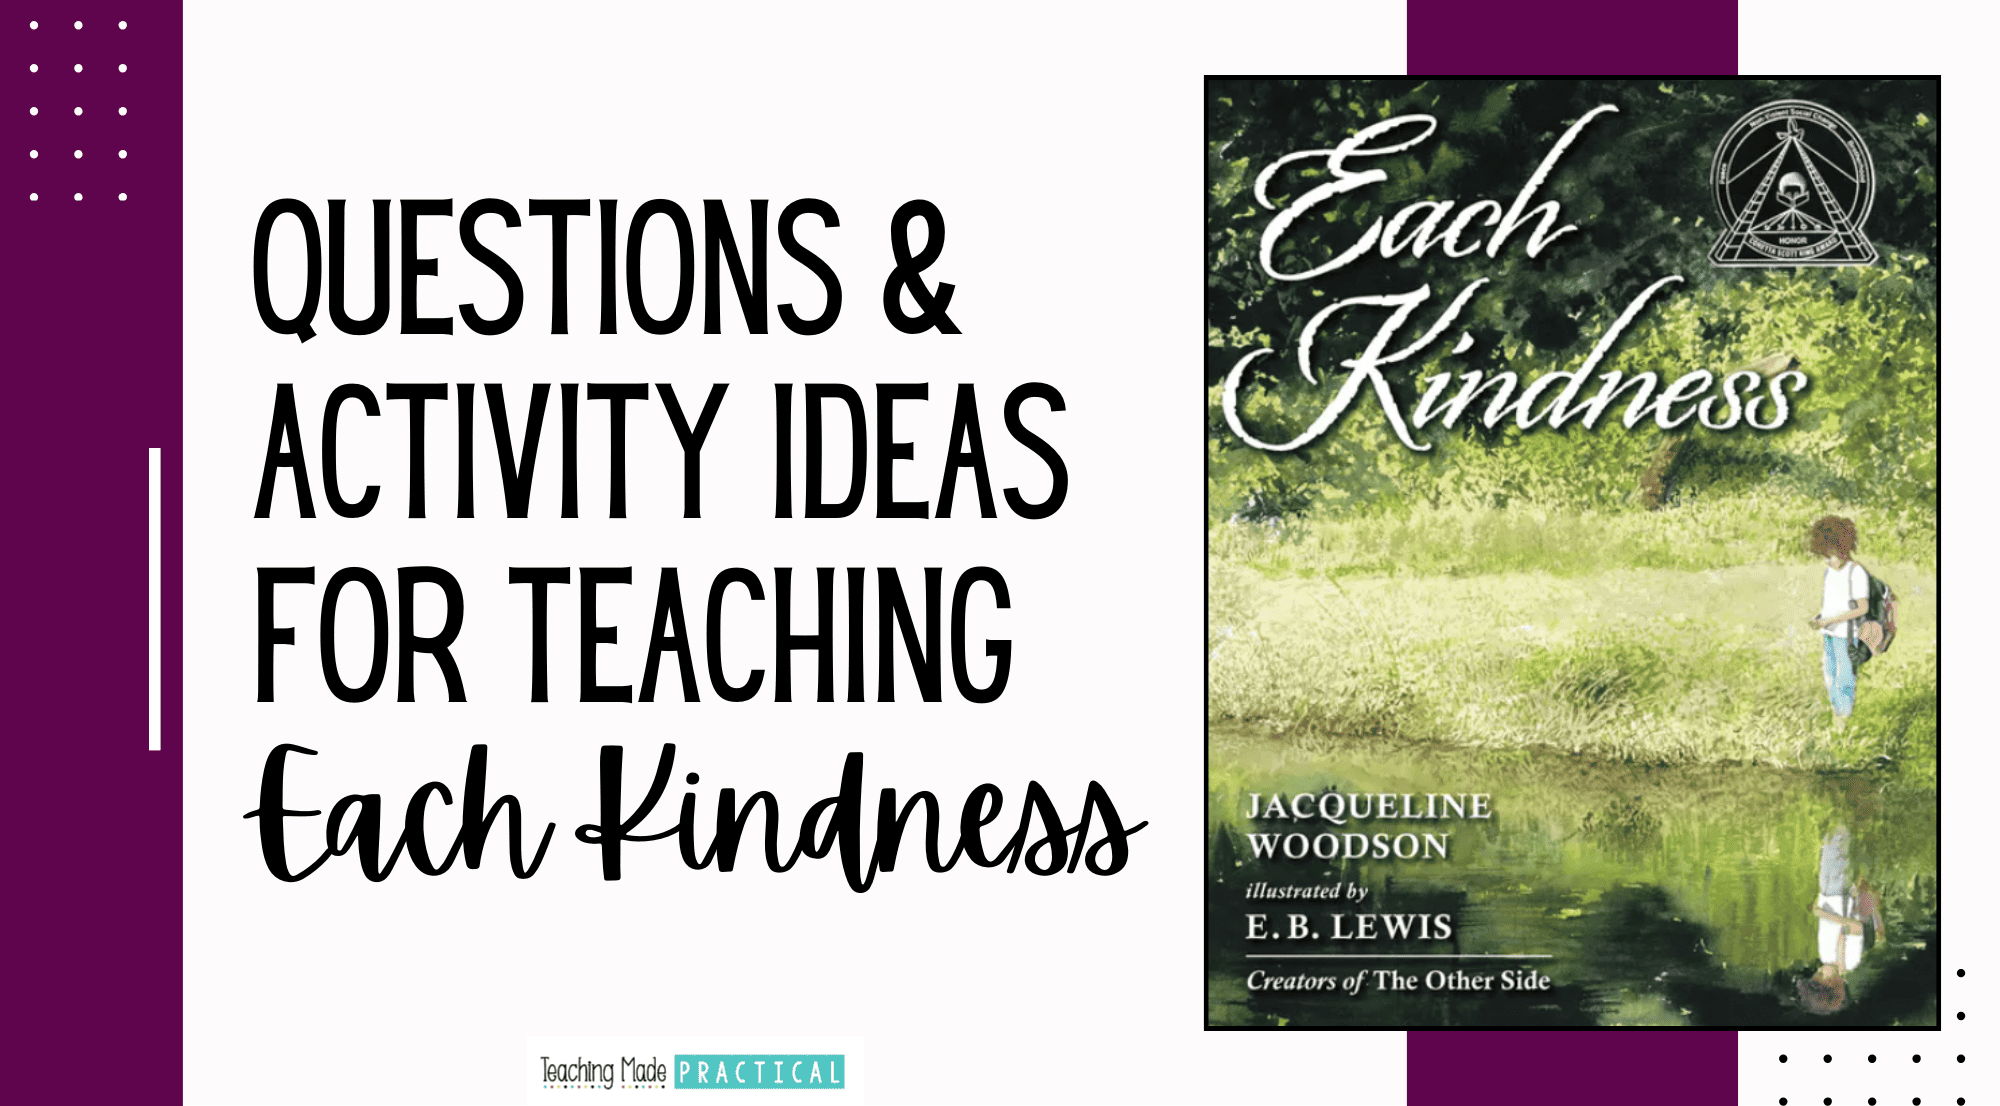 questions and activity ideas for your 3rd, 4th , and 5th grade lesson plans for teaching Jacqueline Woodson's Each Kindness